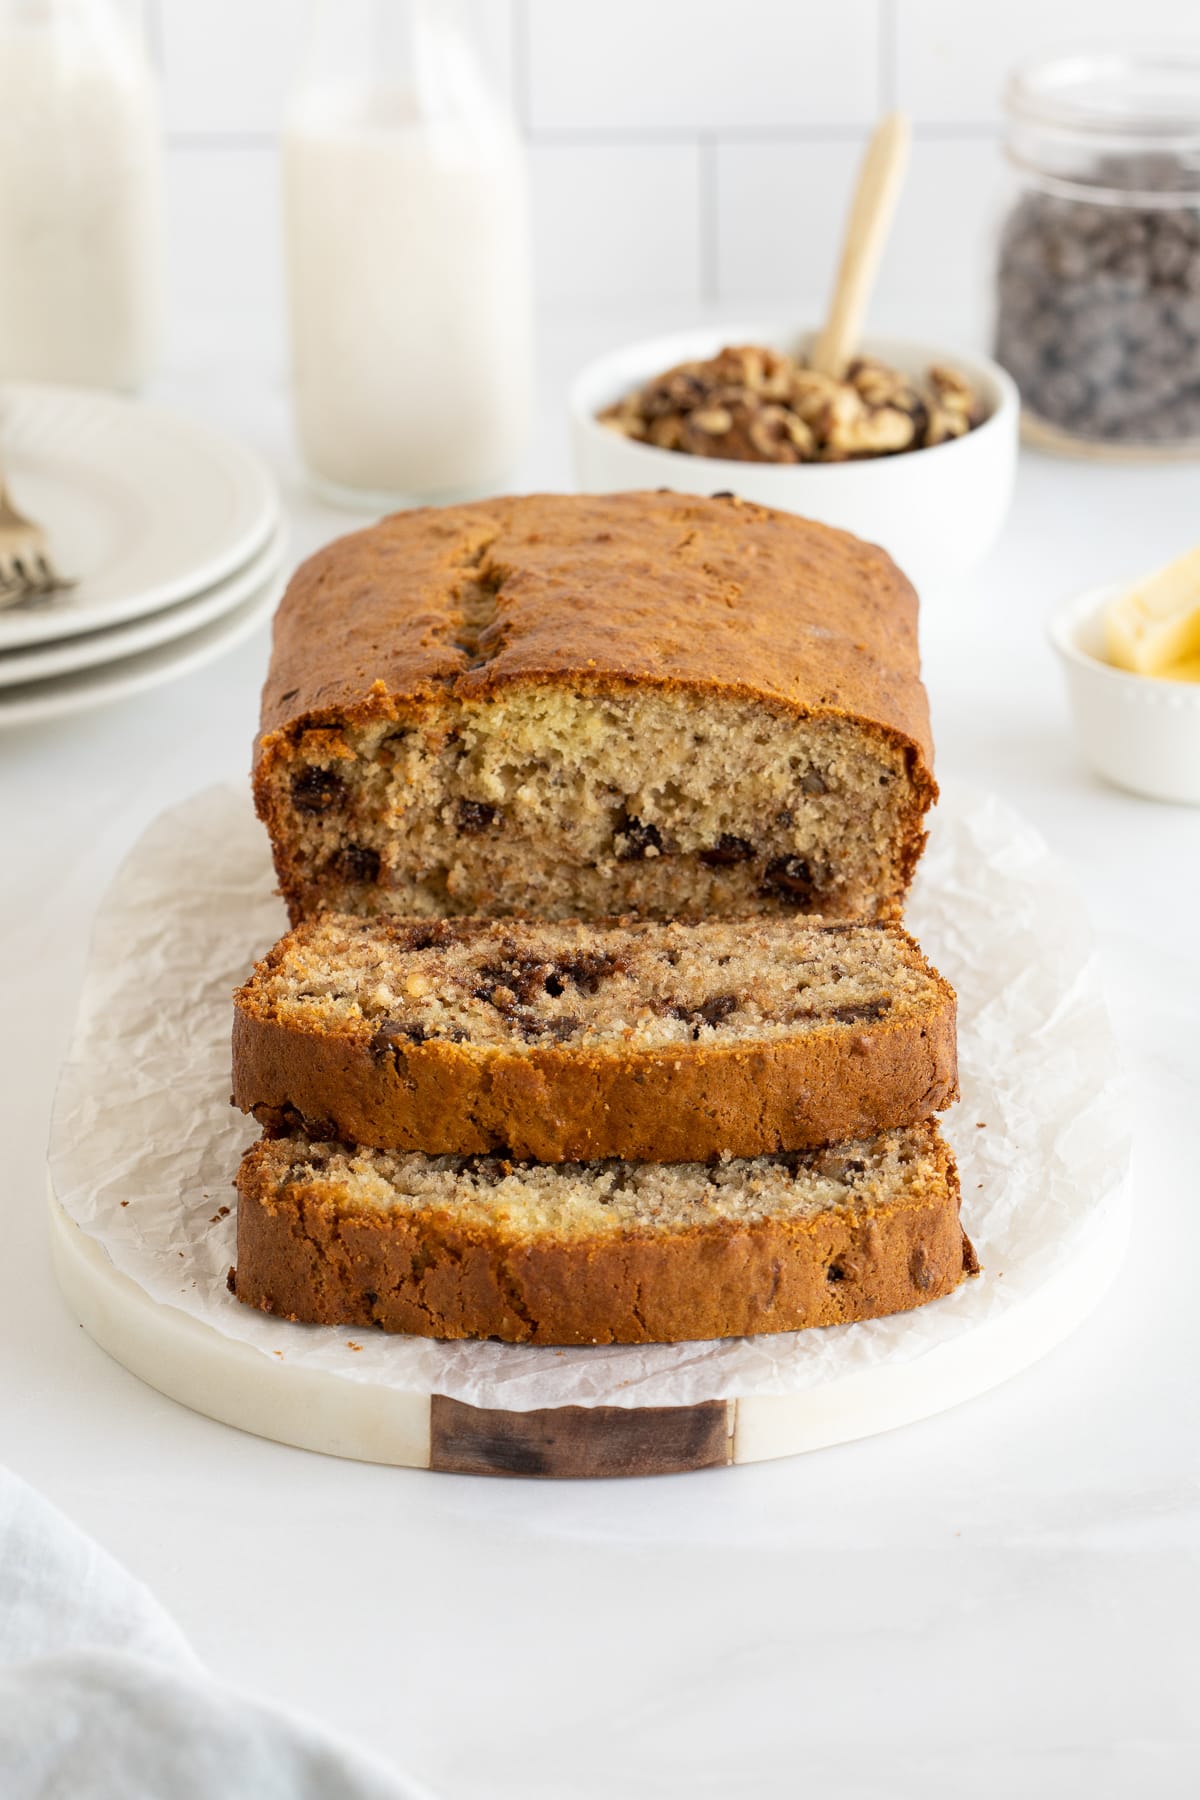 A partially sliced loaf of banana bread with chocolate chips on a white platter.